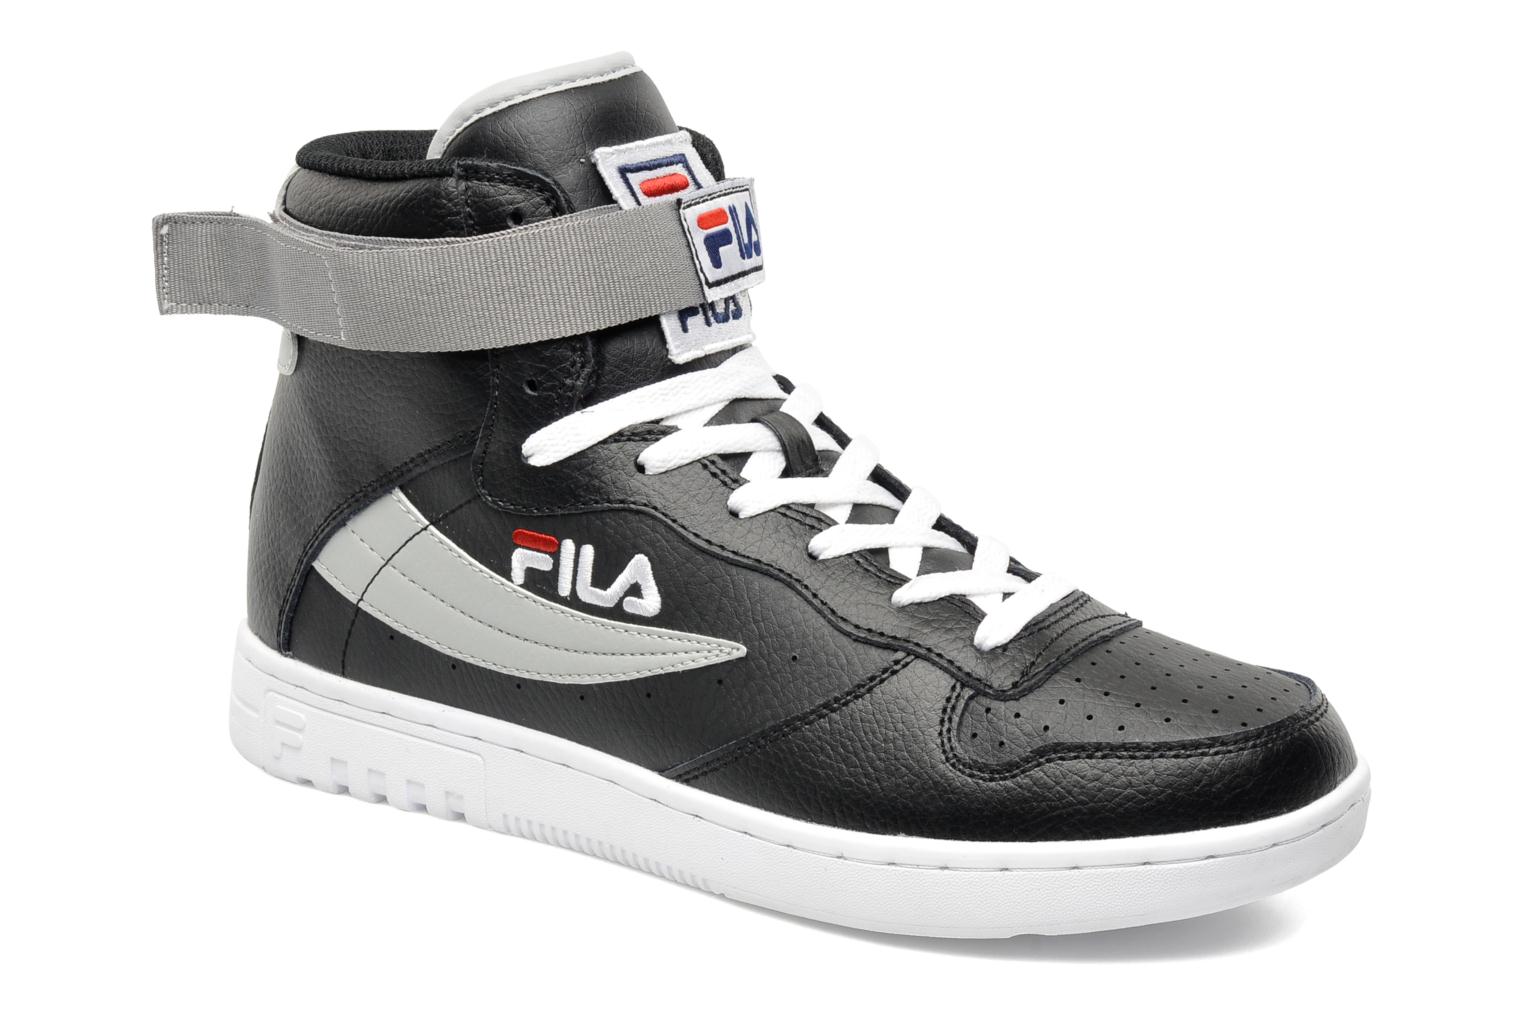 FILA FX-100 Mid Trainers in Black at Sarenza.co.uk (185739)